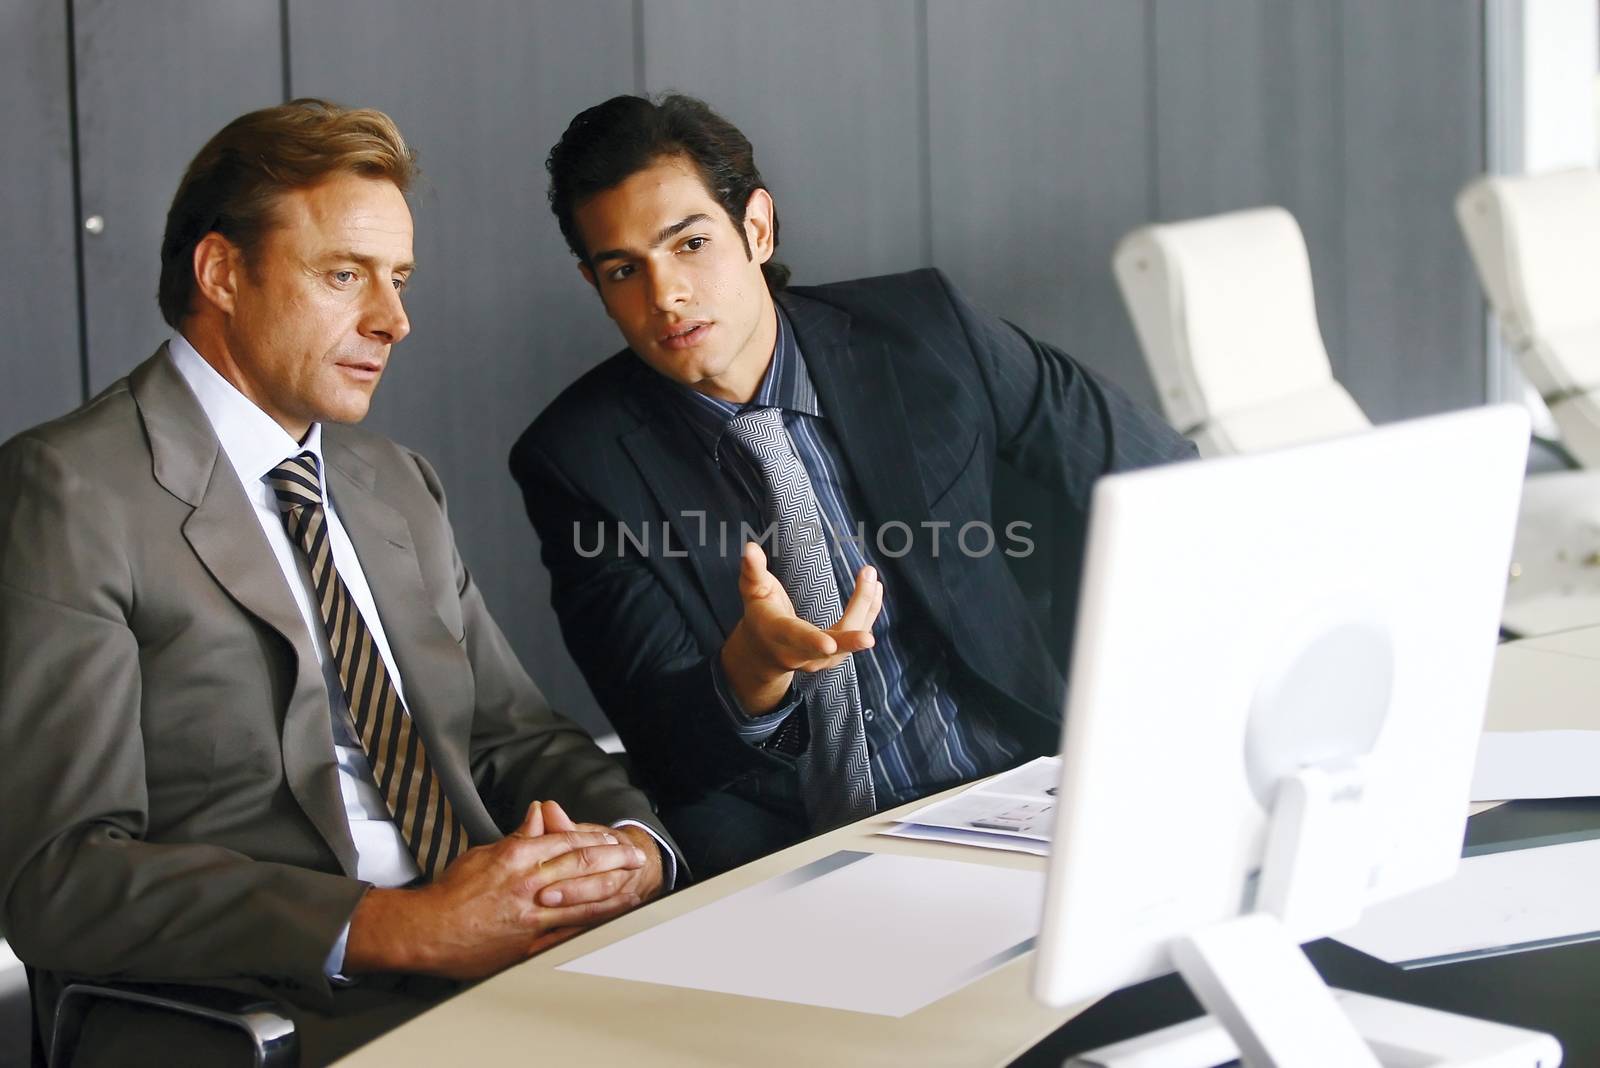 Portrait of a group of business men working together at a meeting